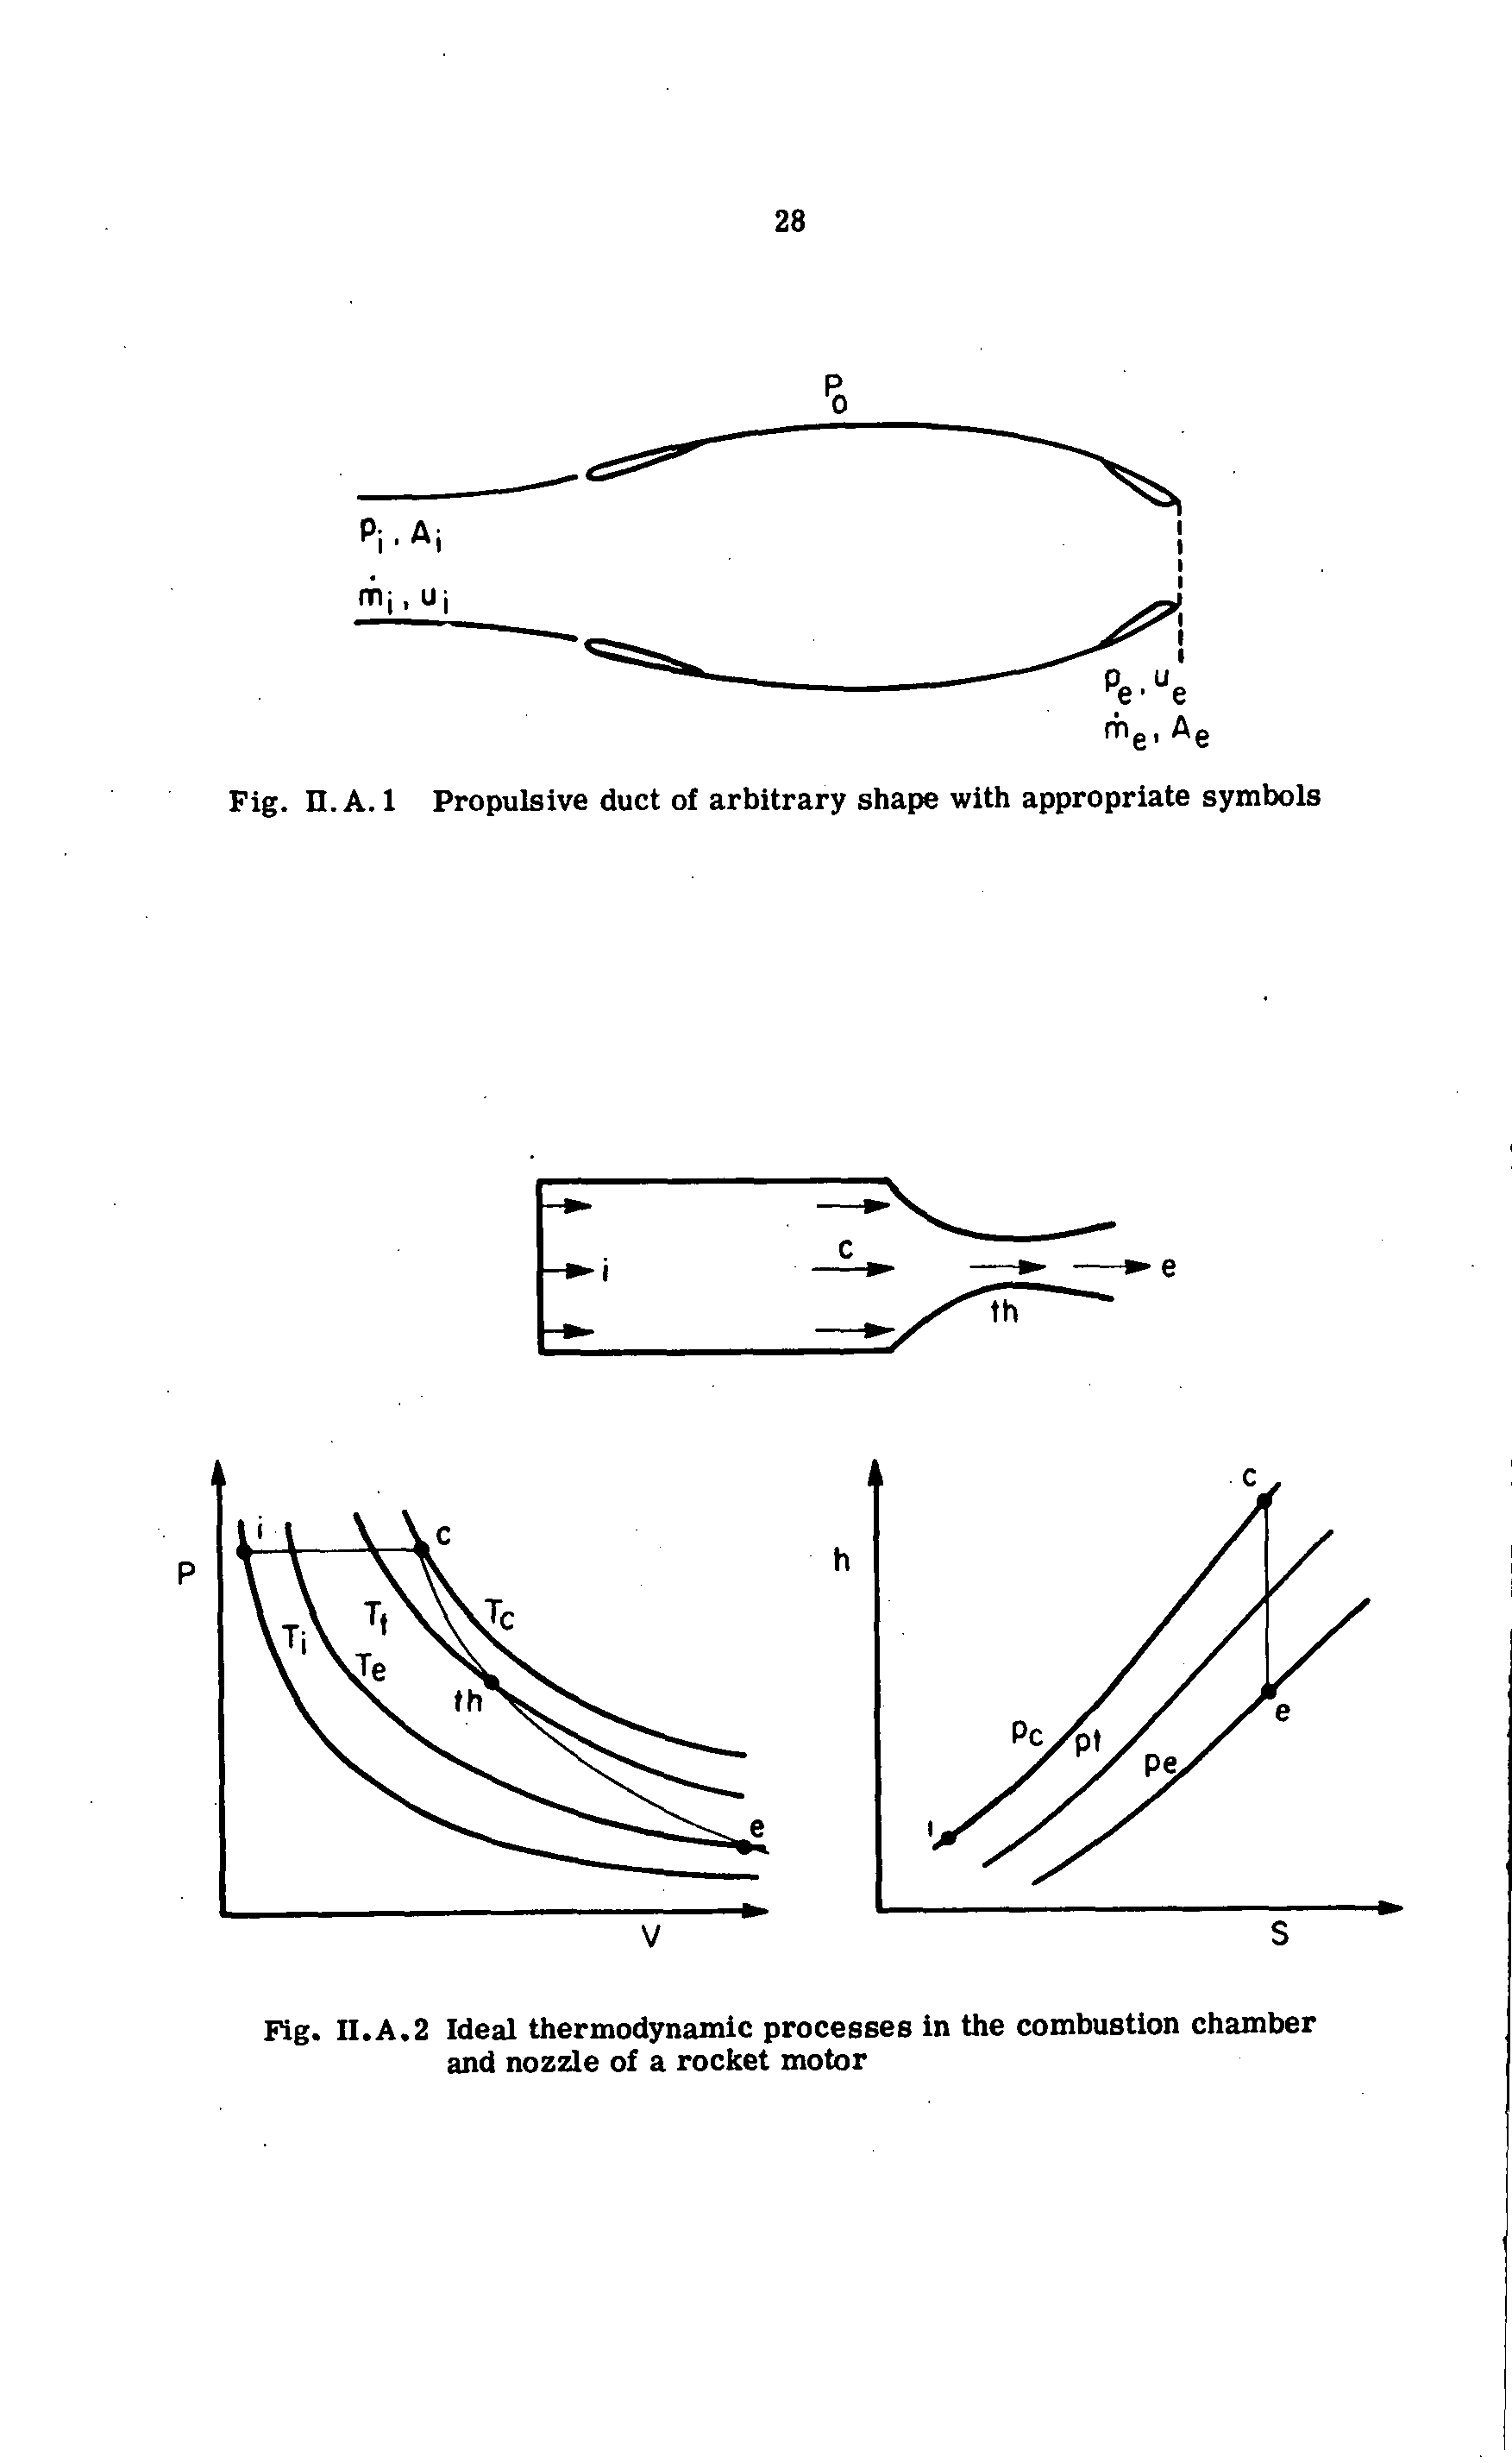 Fig. II.A.2 Ideal thermodynamic processes in the combustion chamber and nozzle of a rocket motor...